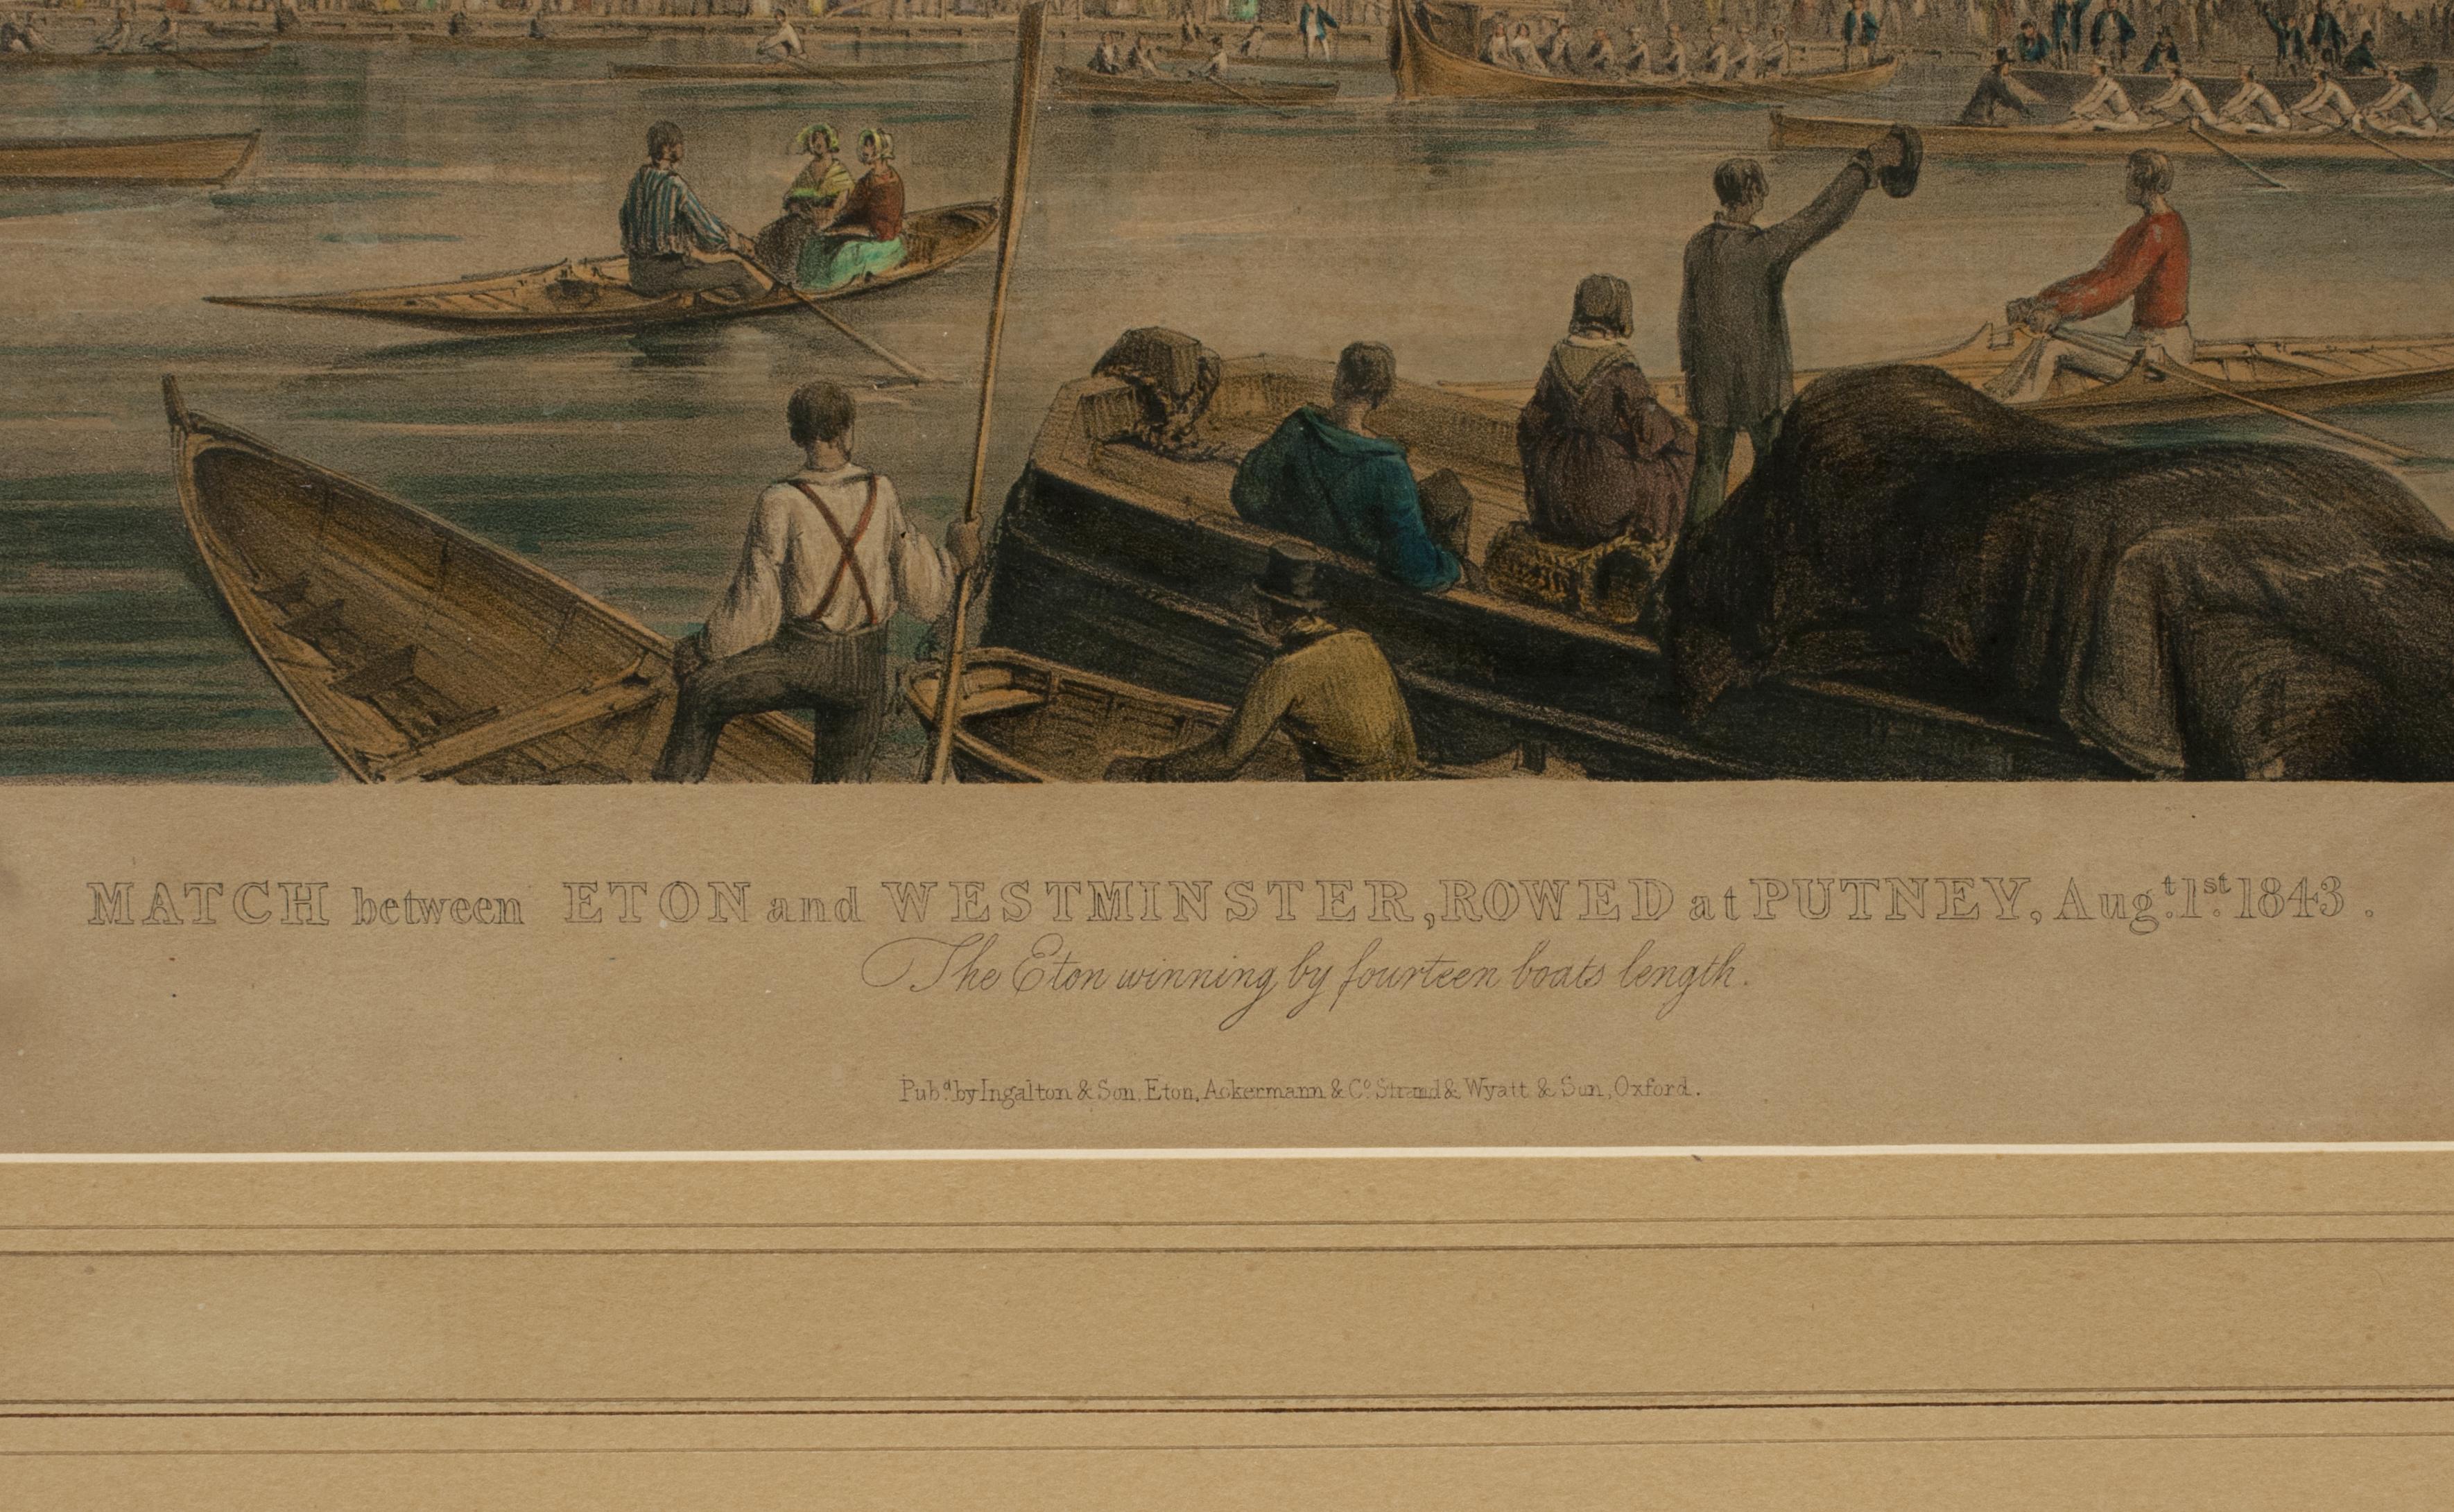 Sporting Art Rare Rowing Lithograph, Eton V Westminster Rowed At Putney